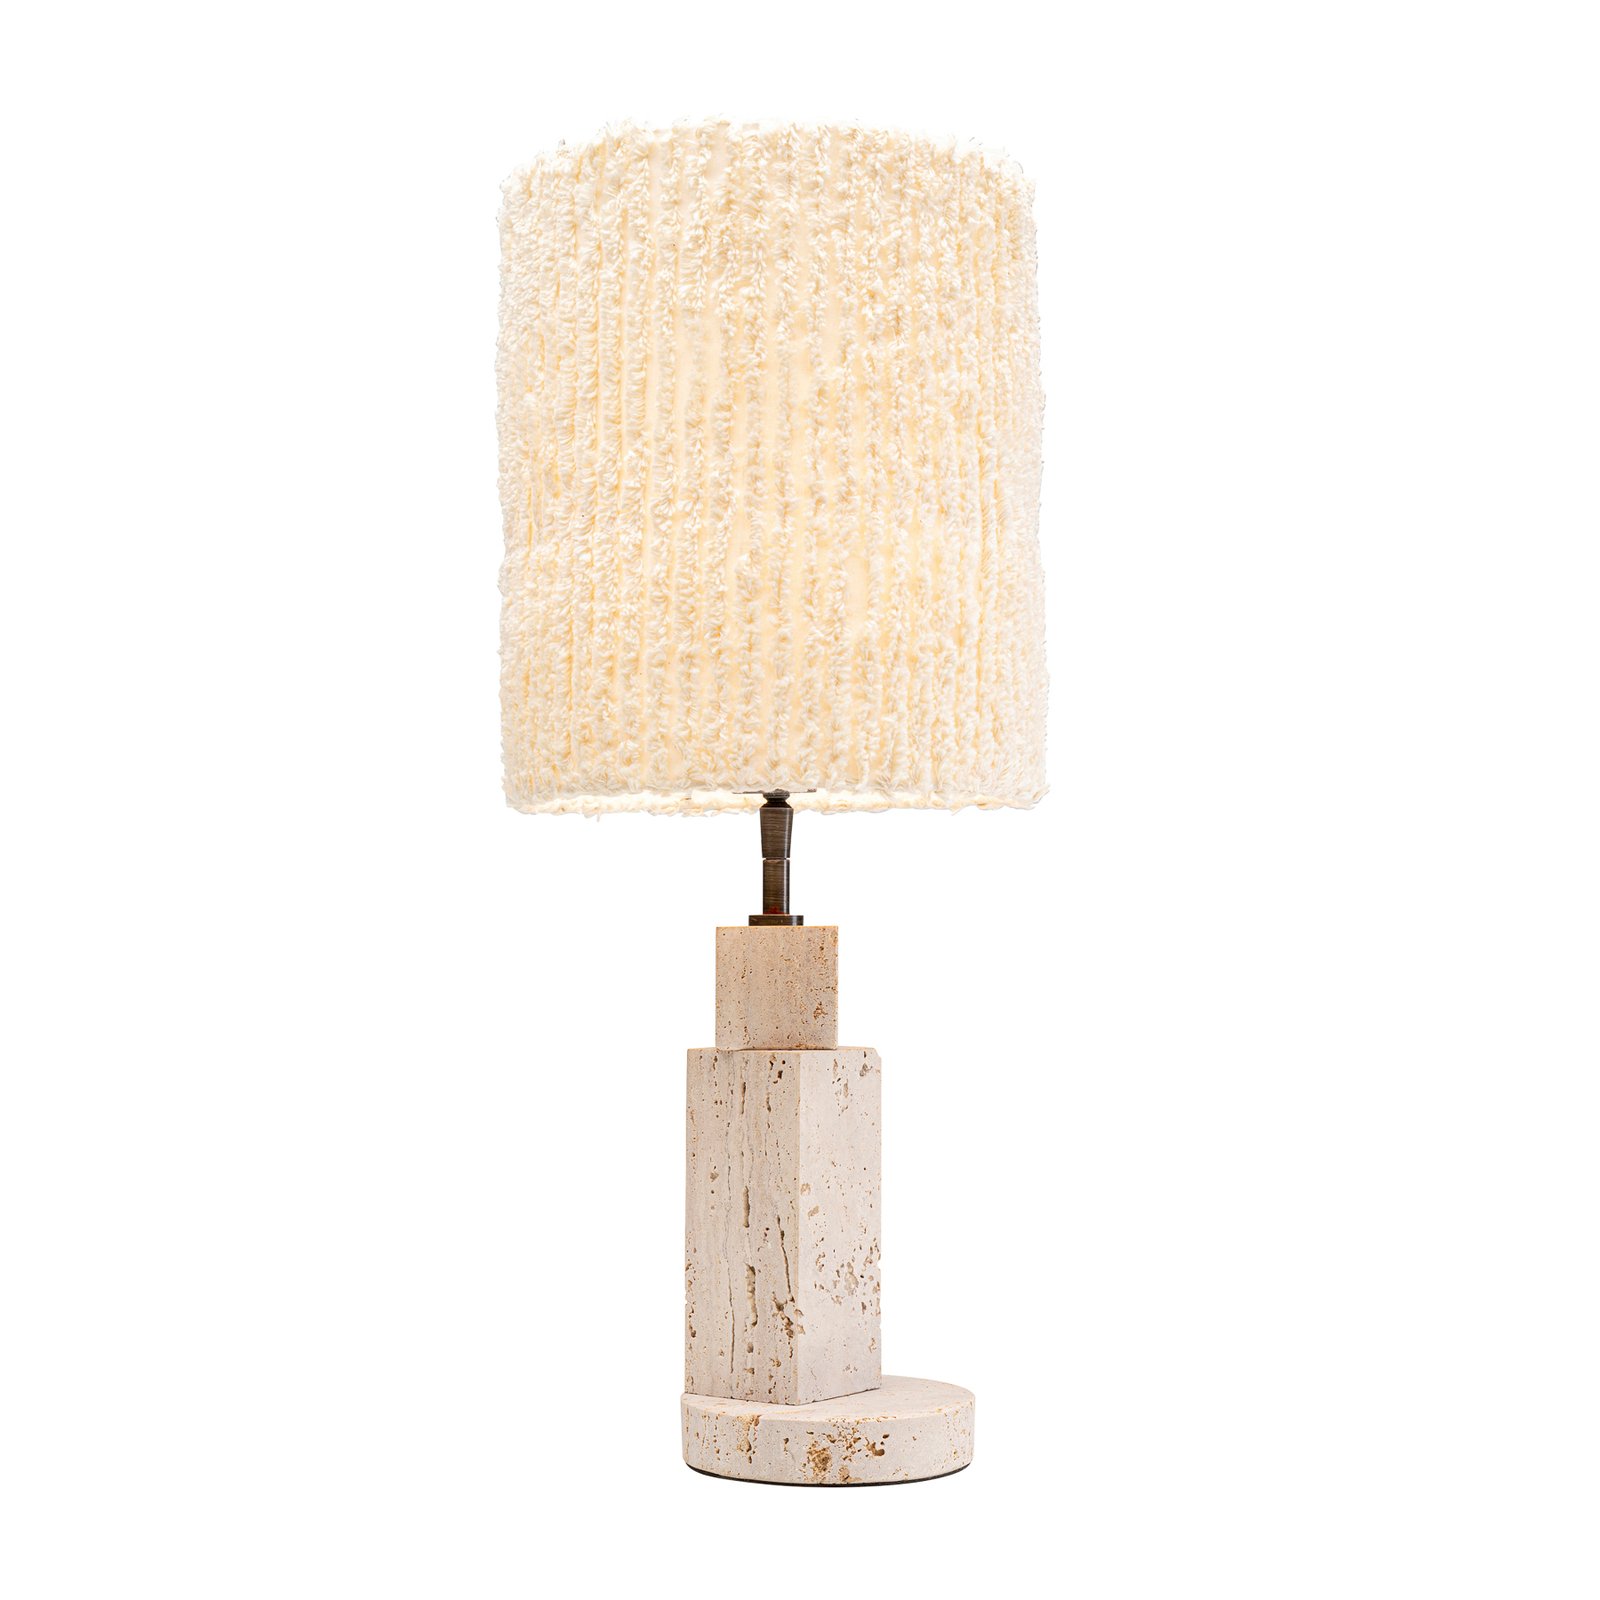 KARE Lipsi table lamp with a travertine base